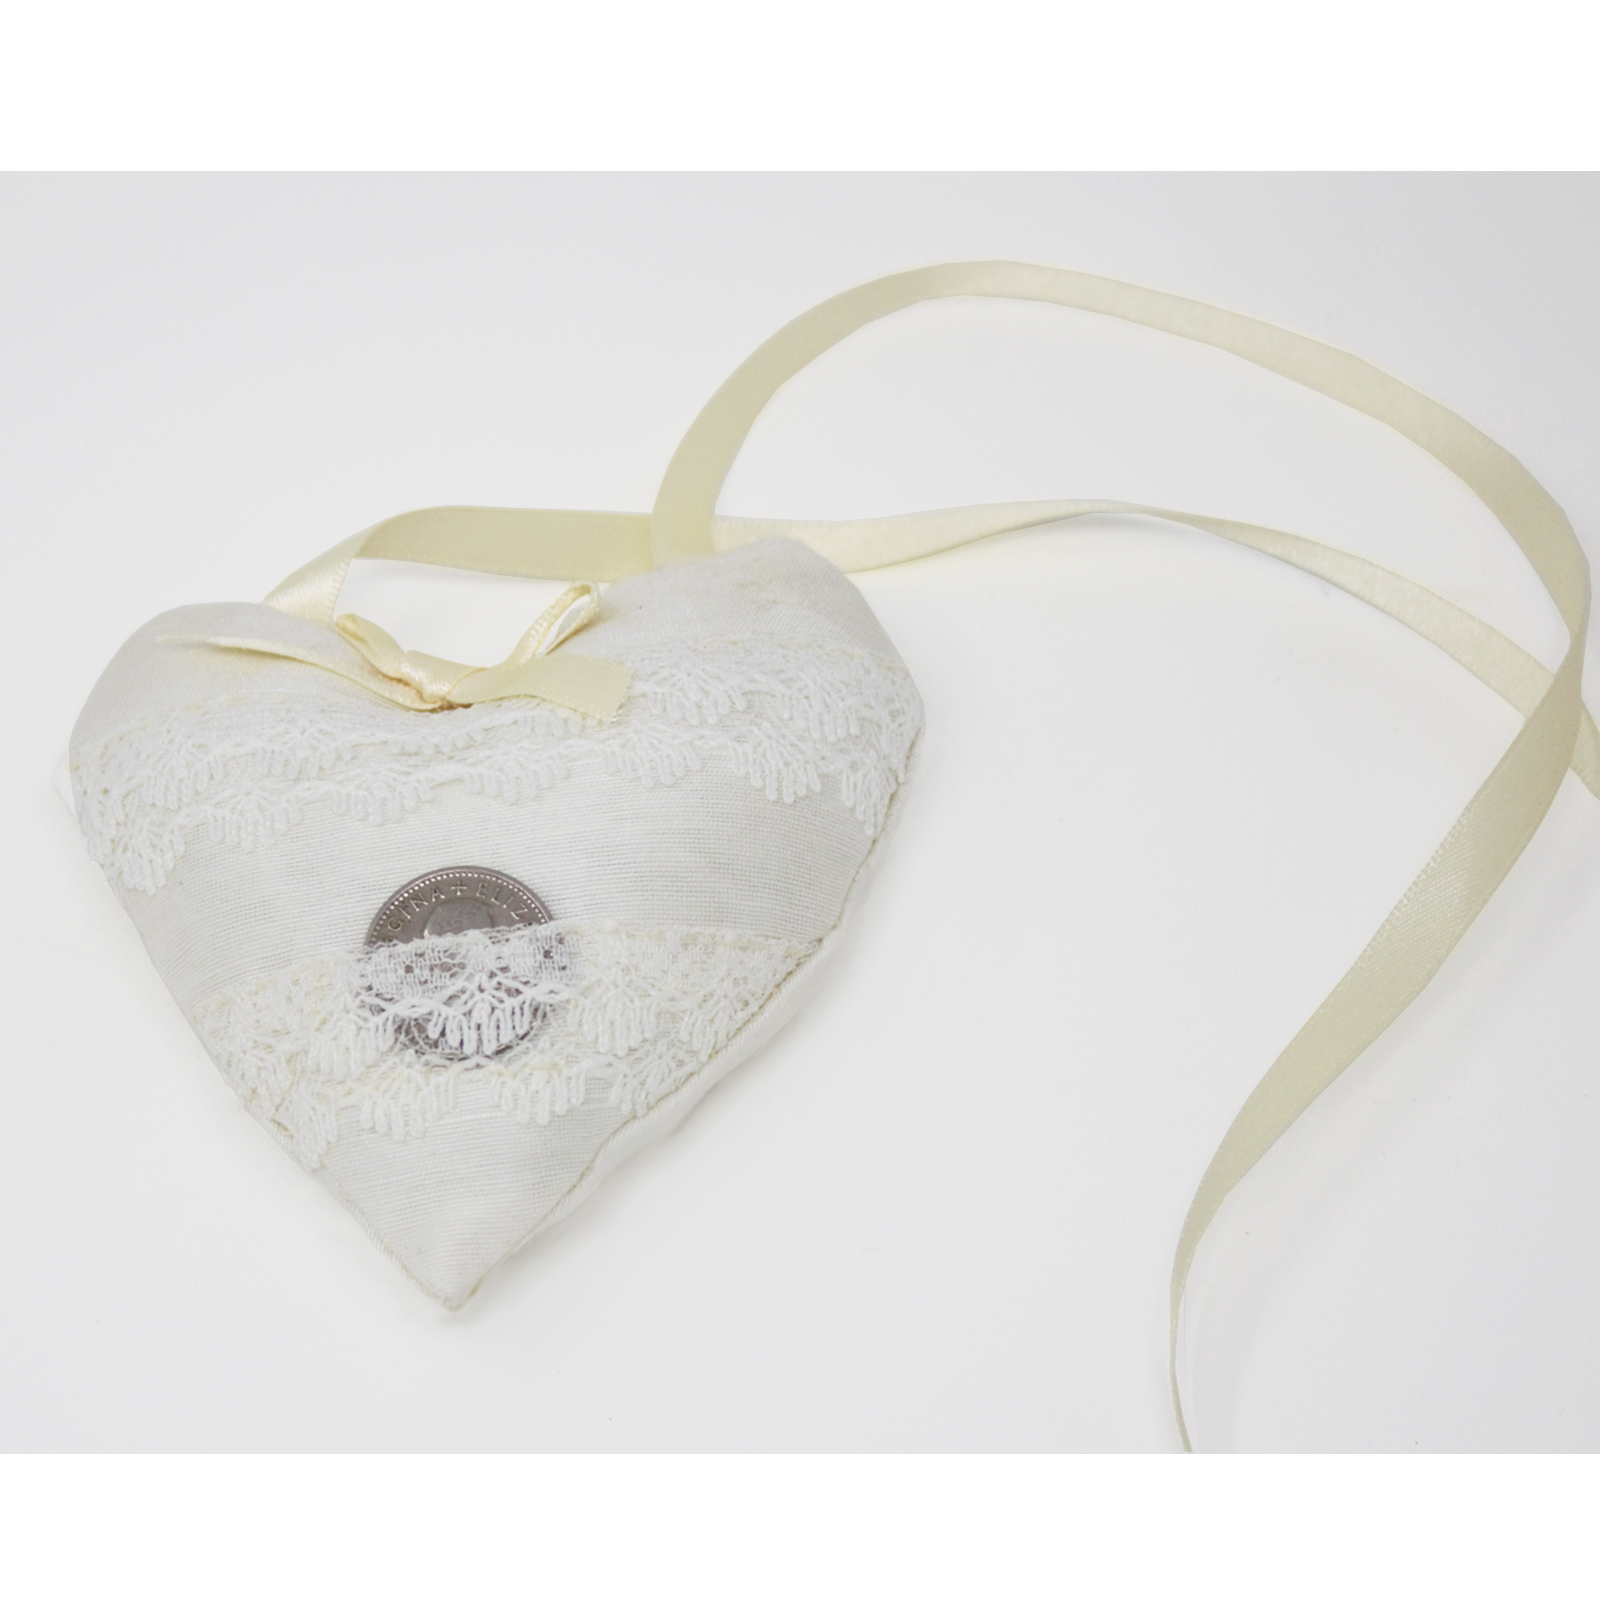 Nottingham Lace Covered Heart with Lucky Sixpence